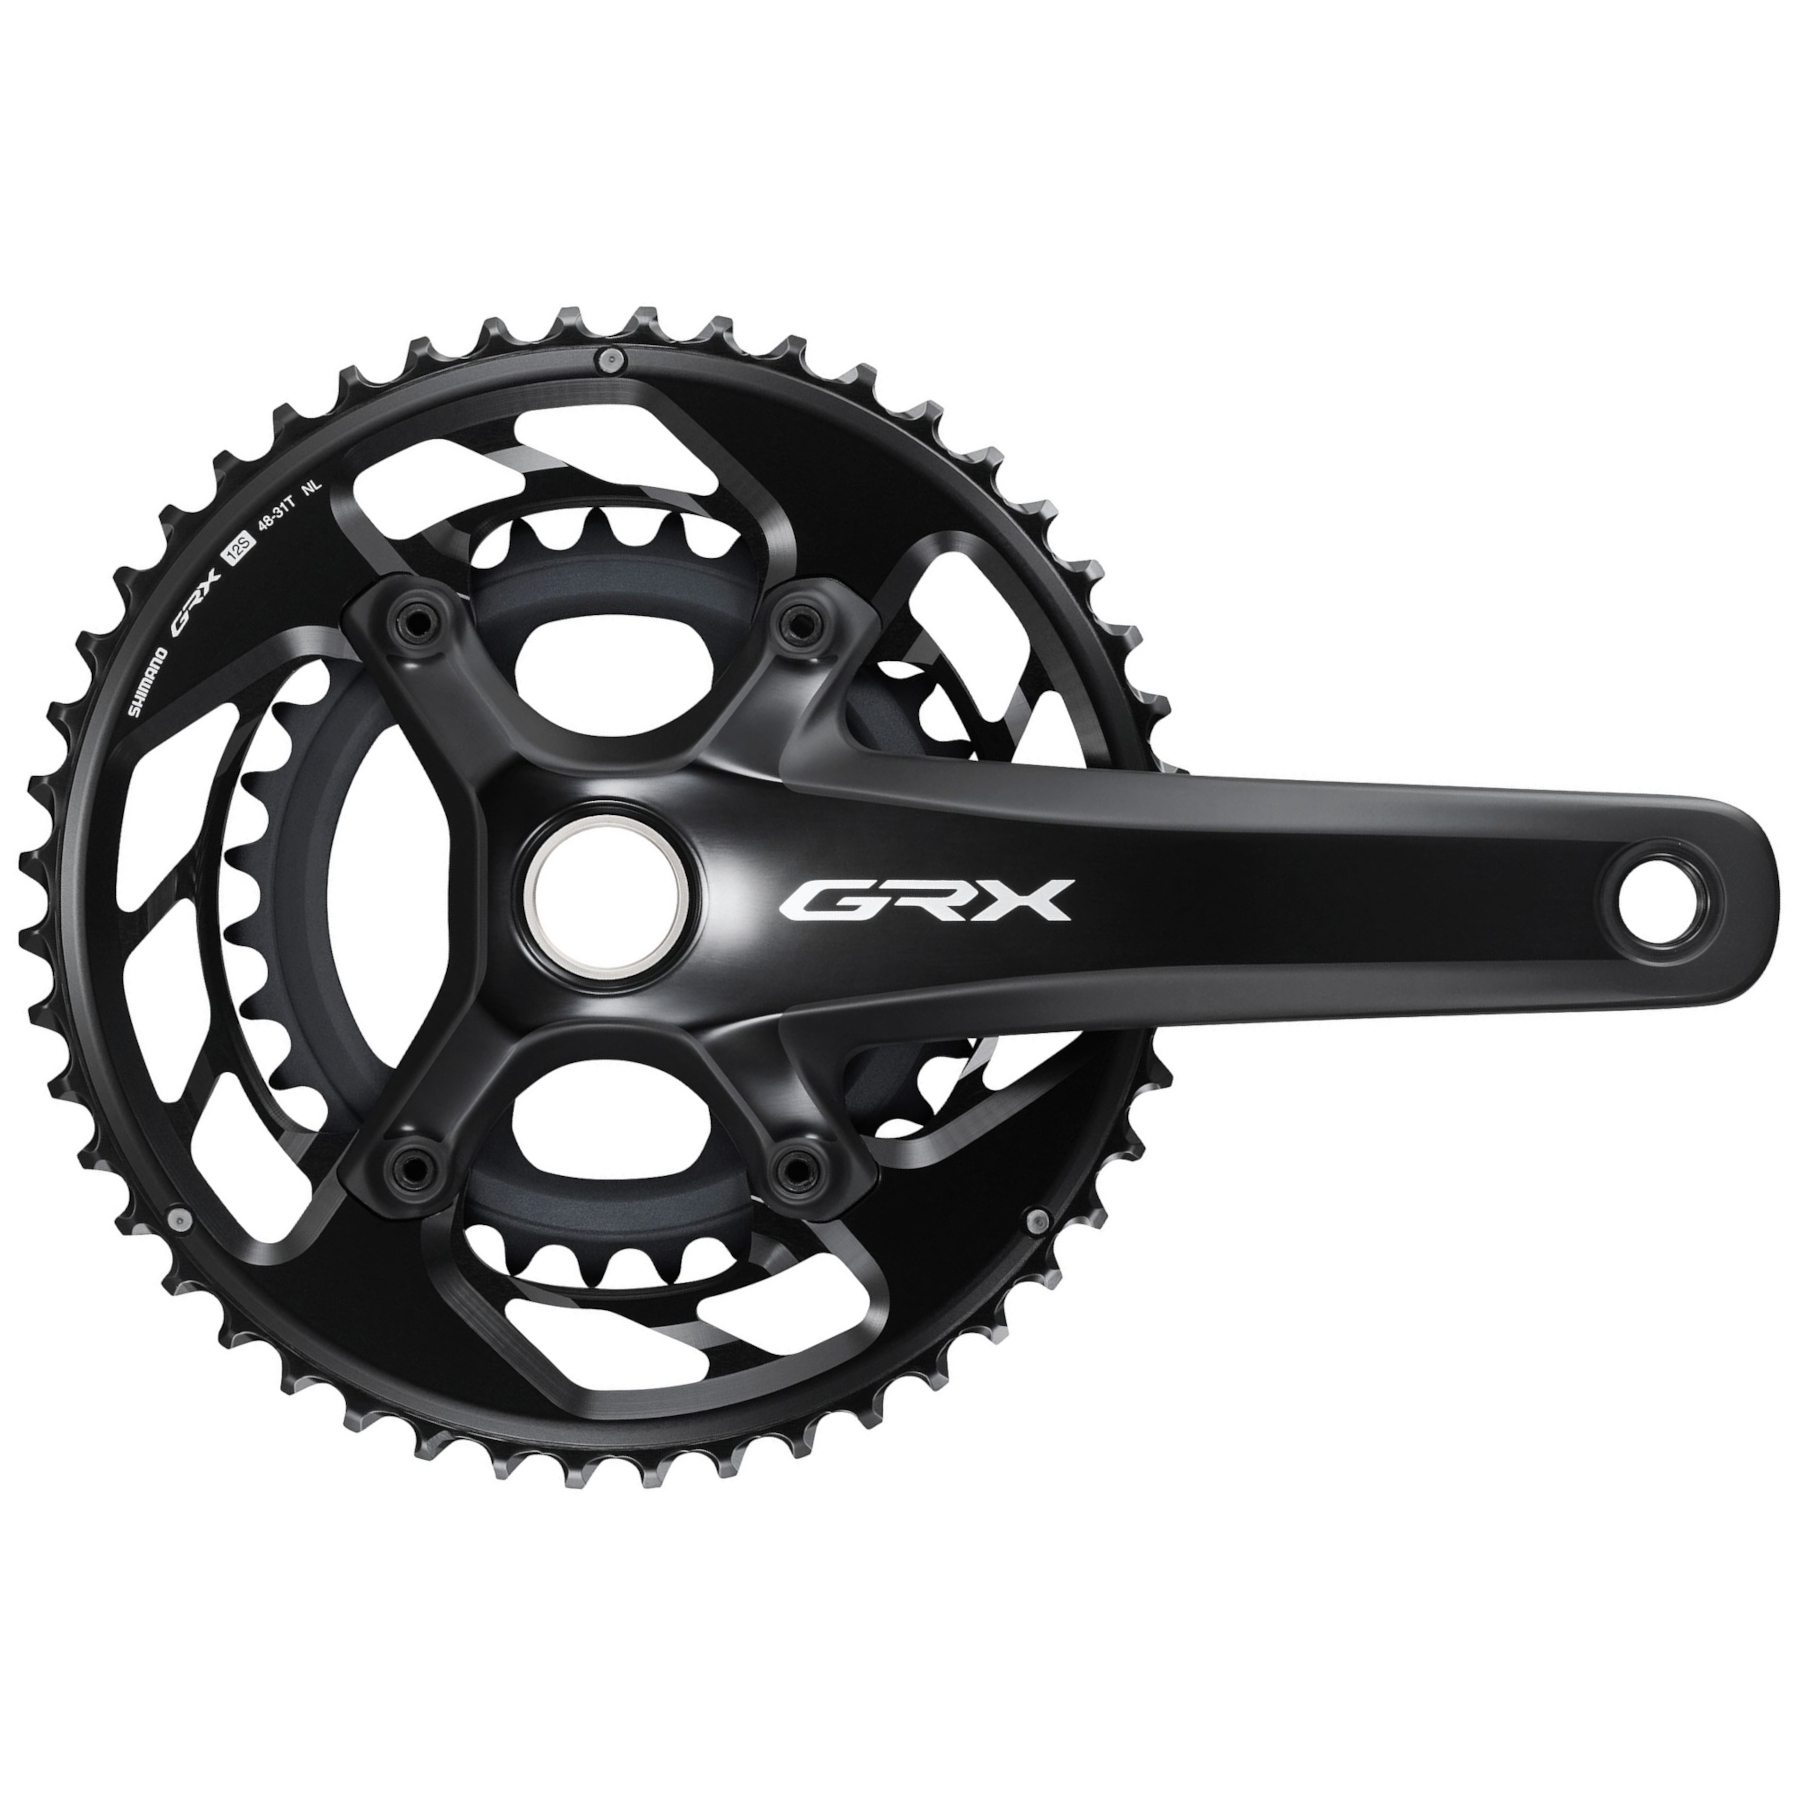 Picture of Shimano GRX FC-RX820 Crankset - 2x12-speed